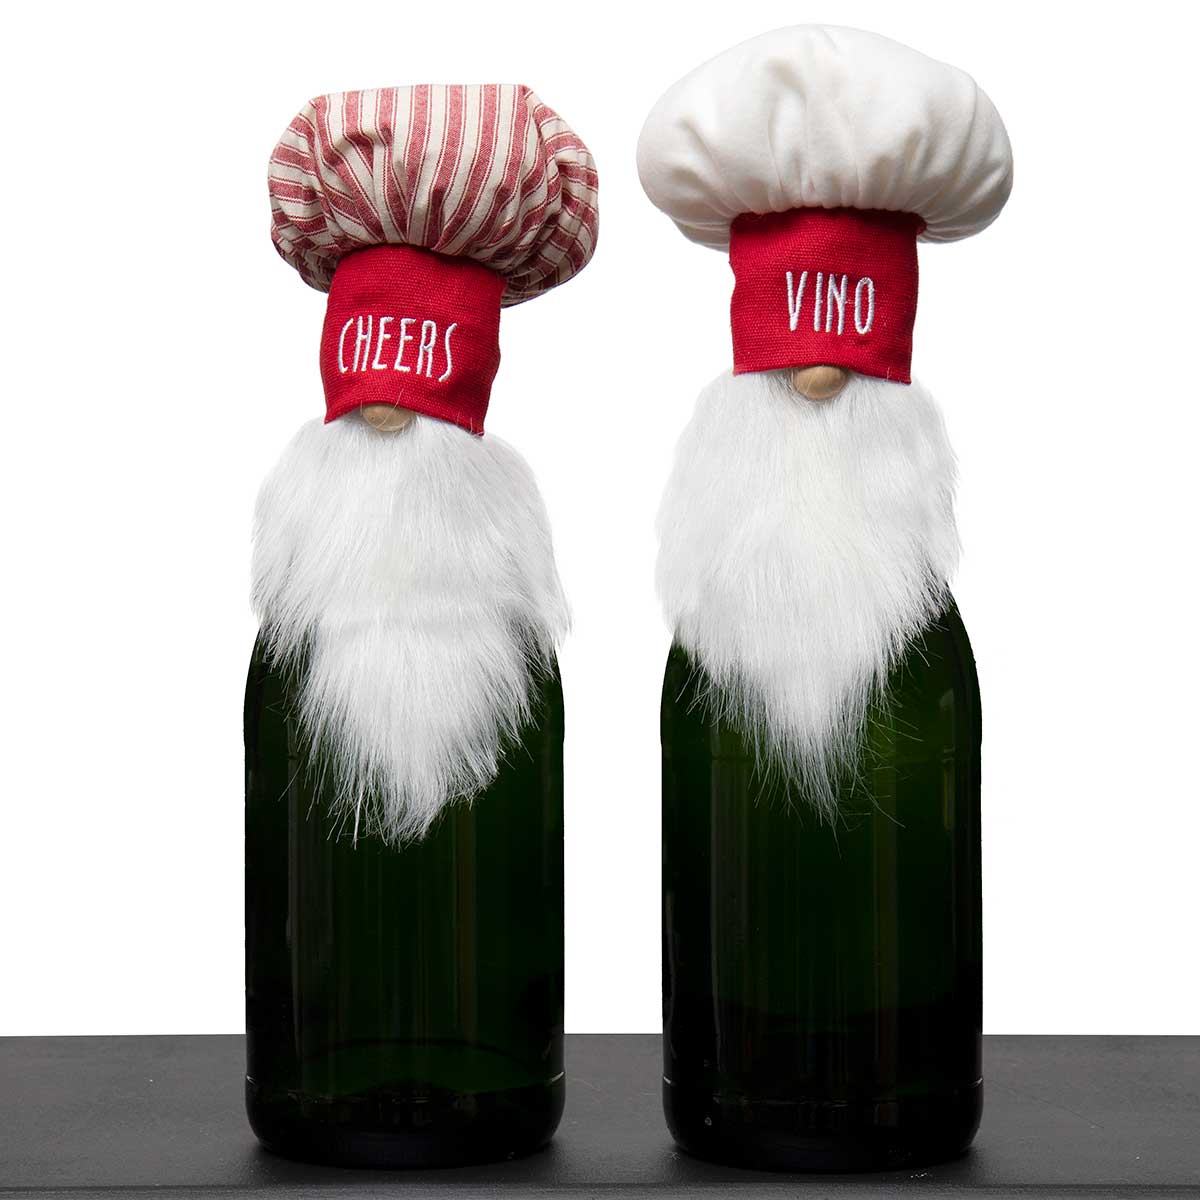 b50 Cheers/Vino Gnome Bottle Topper with Wood Nose 10"